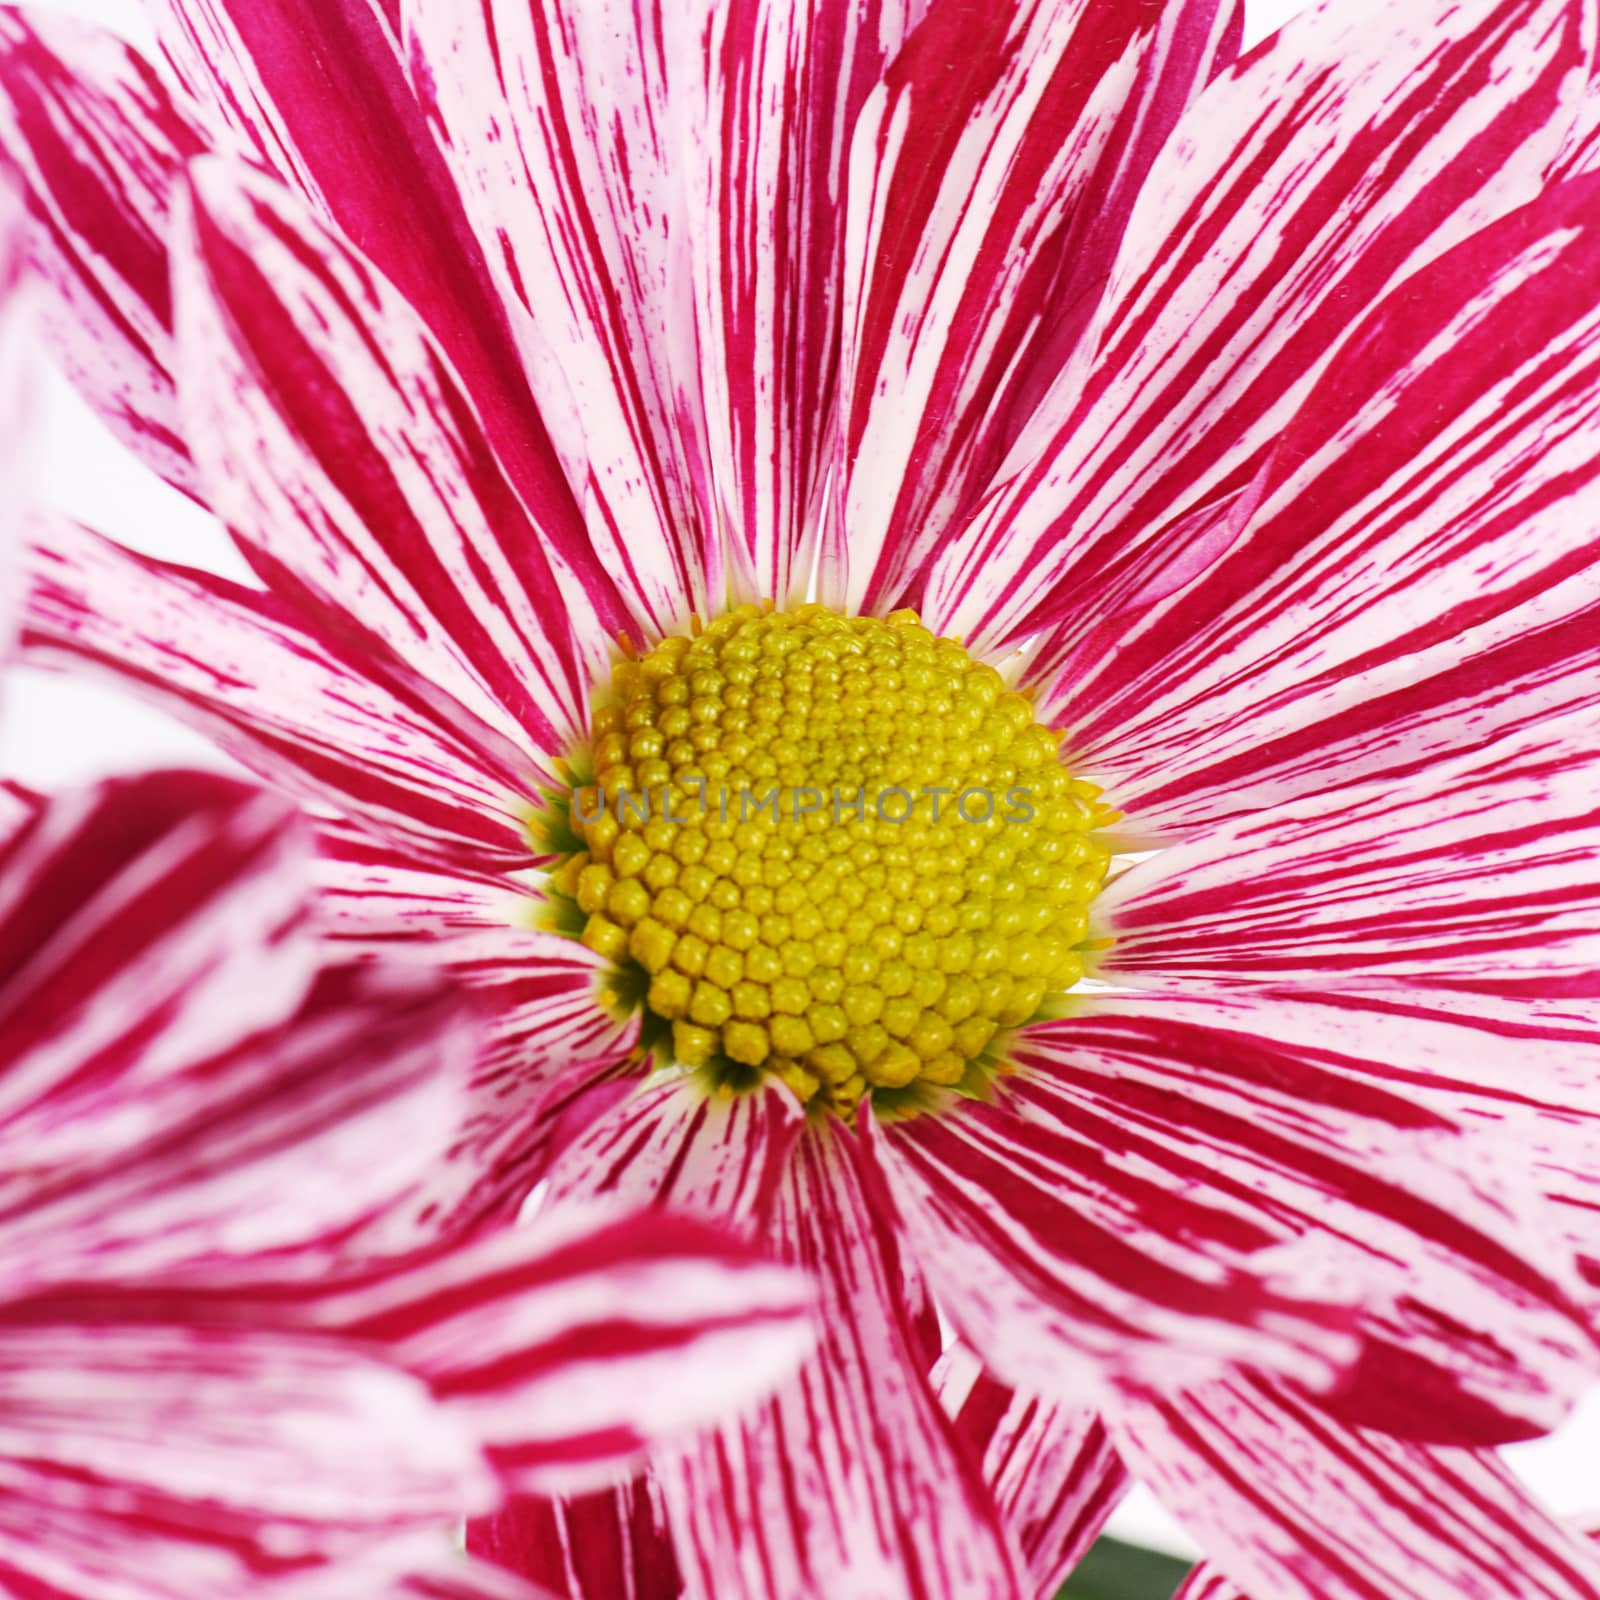 The flower pink chrysanthemums as a  background